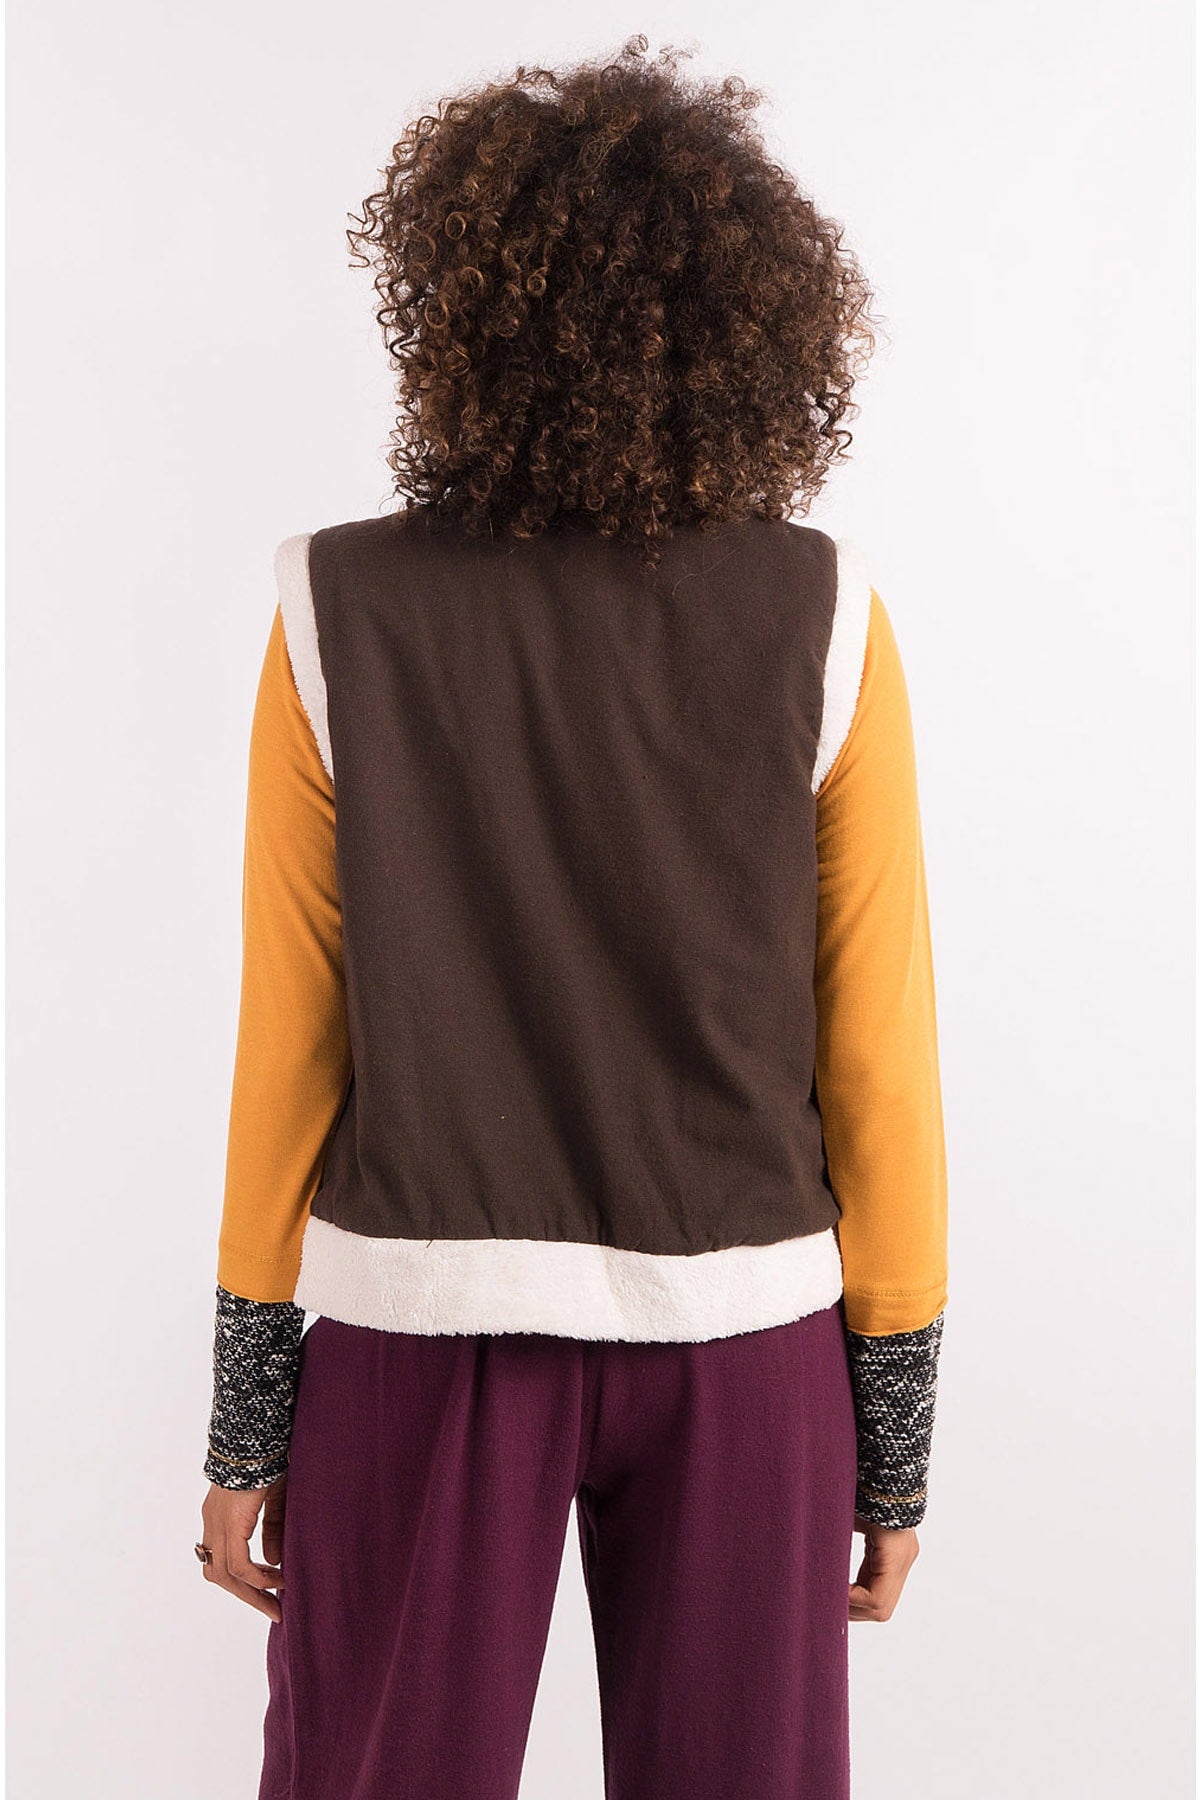 Brown Embroidered Vest